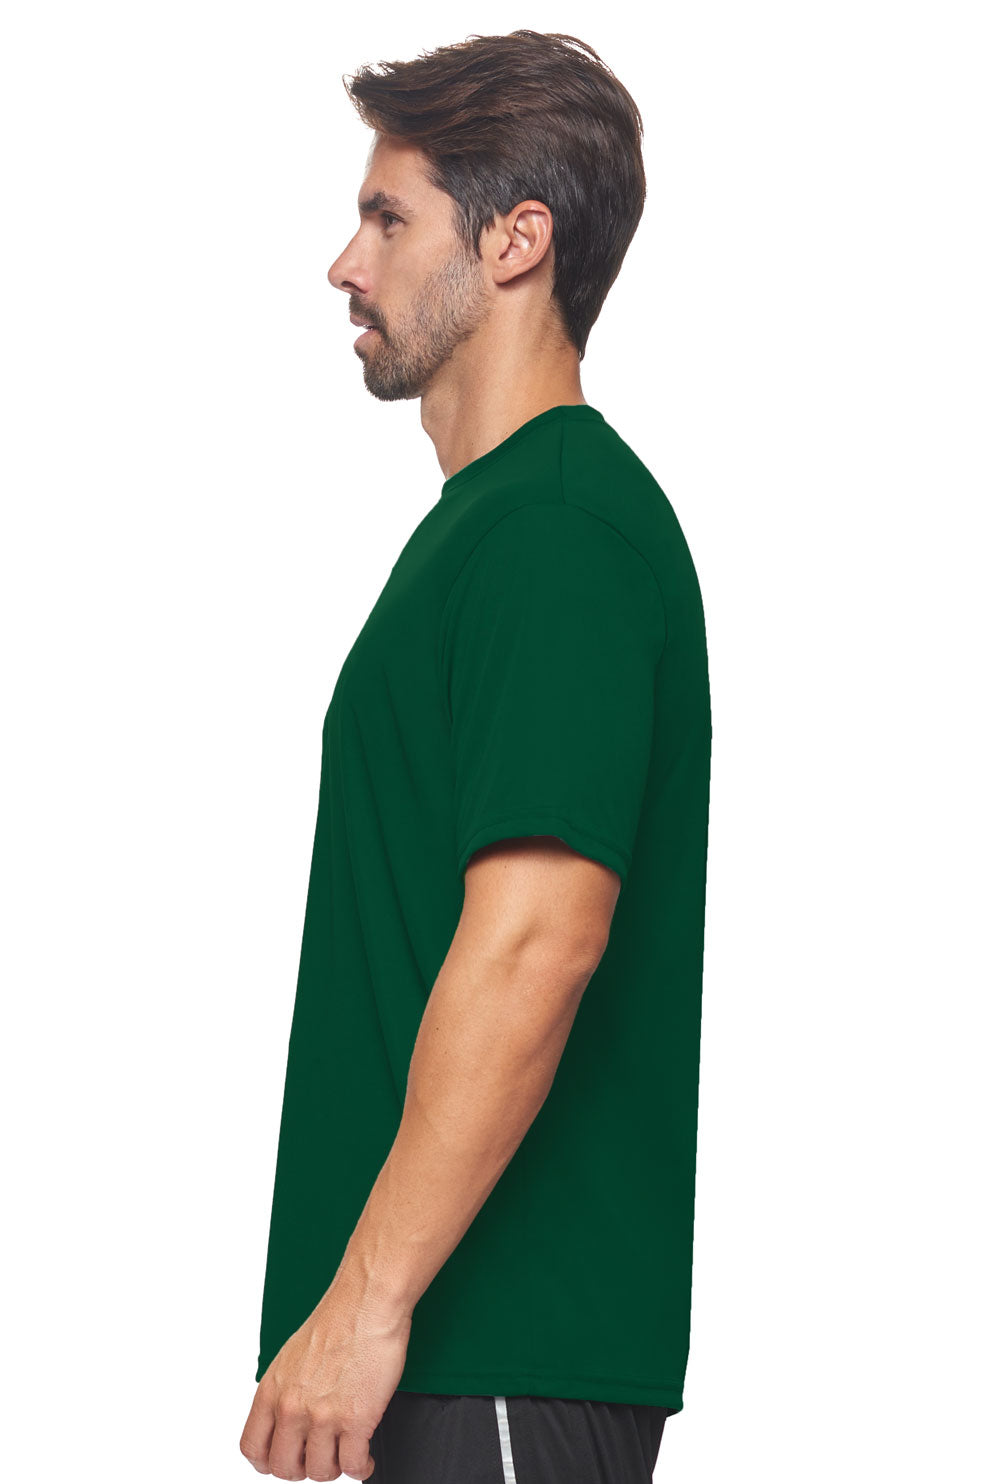 Expert Brand Wholesale Men's DriMax™ Crewneck Performance Tee Made in USA AI801D forest green image 3#forest